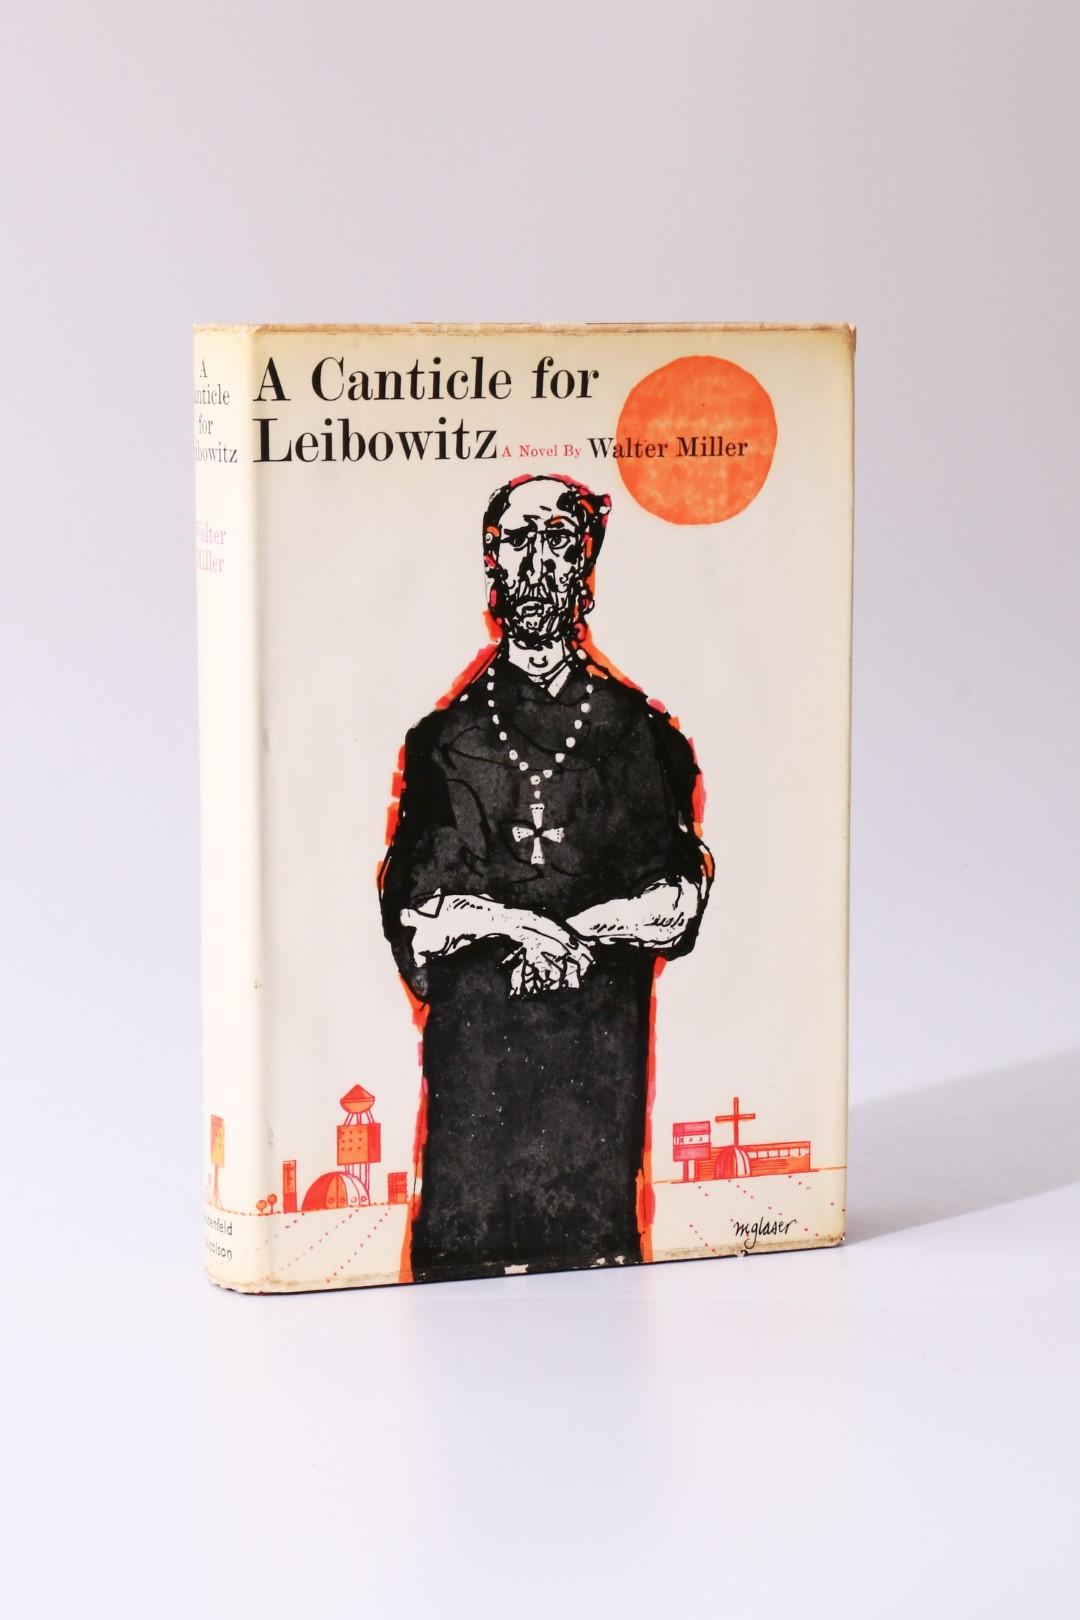 Walter Miller - A Canticle for Leibowitz - Weidenfeld & Nicolson, 1960, First Edition.